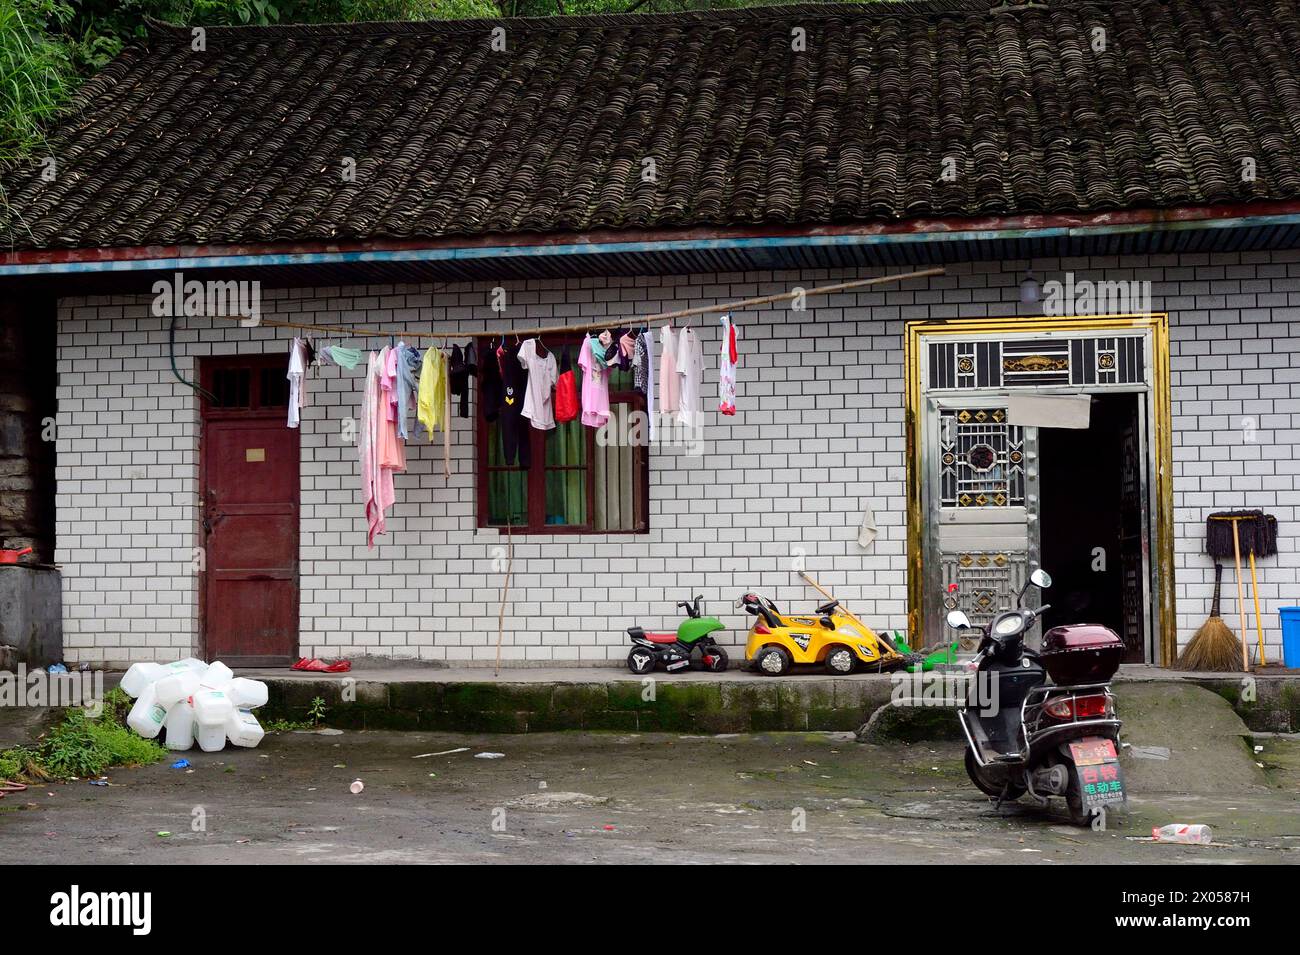 Children's clothes hanging dry near a scooter and toy motorcycle in front of a cinderblock home in the Zhangjiajie, China. Stock Photo